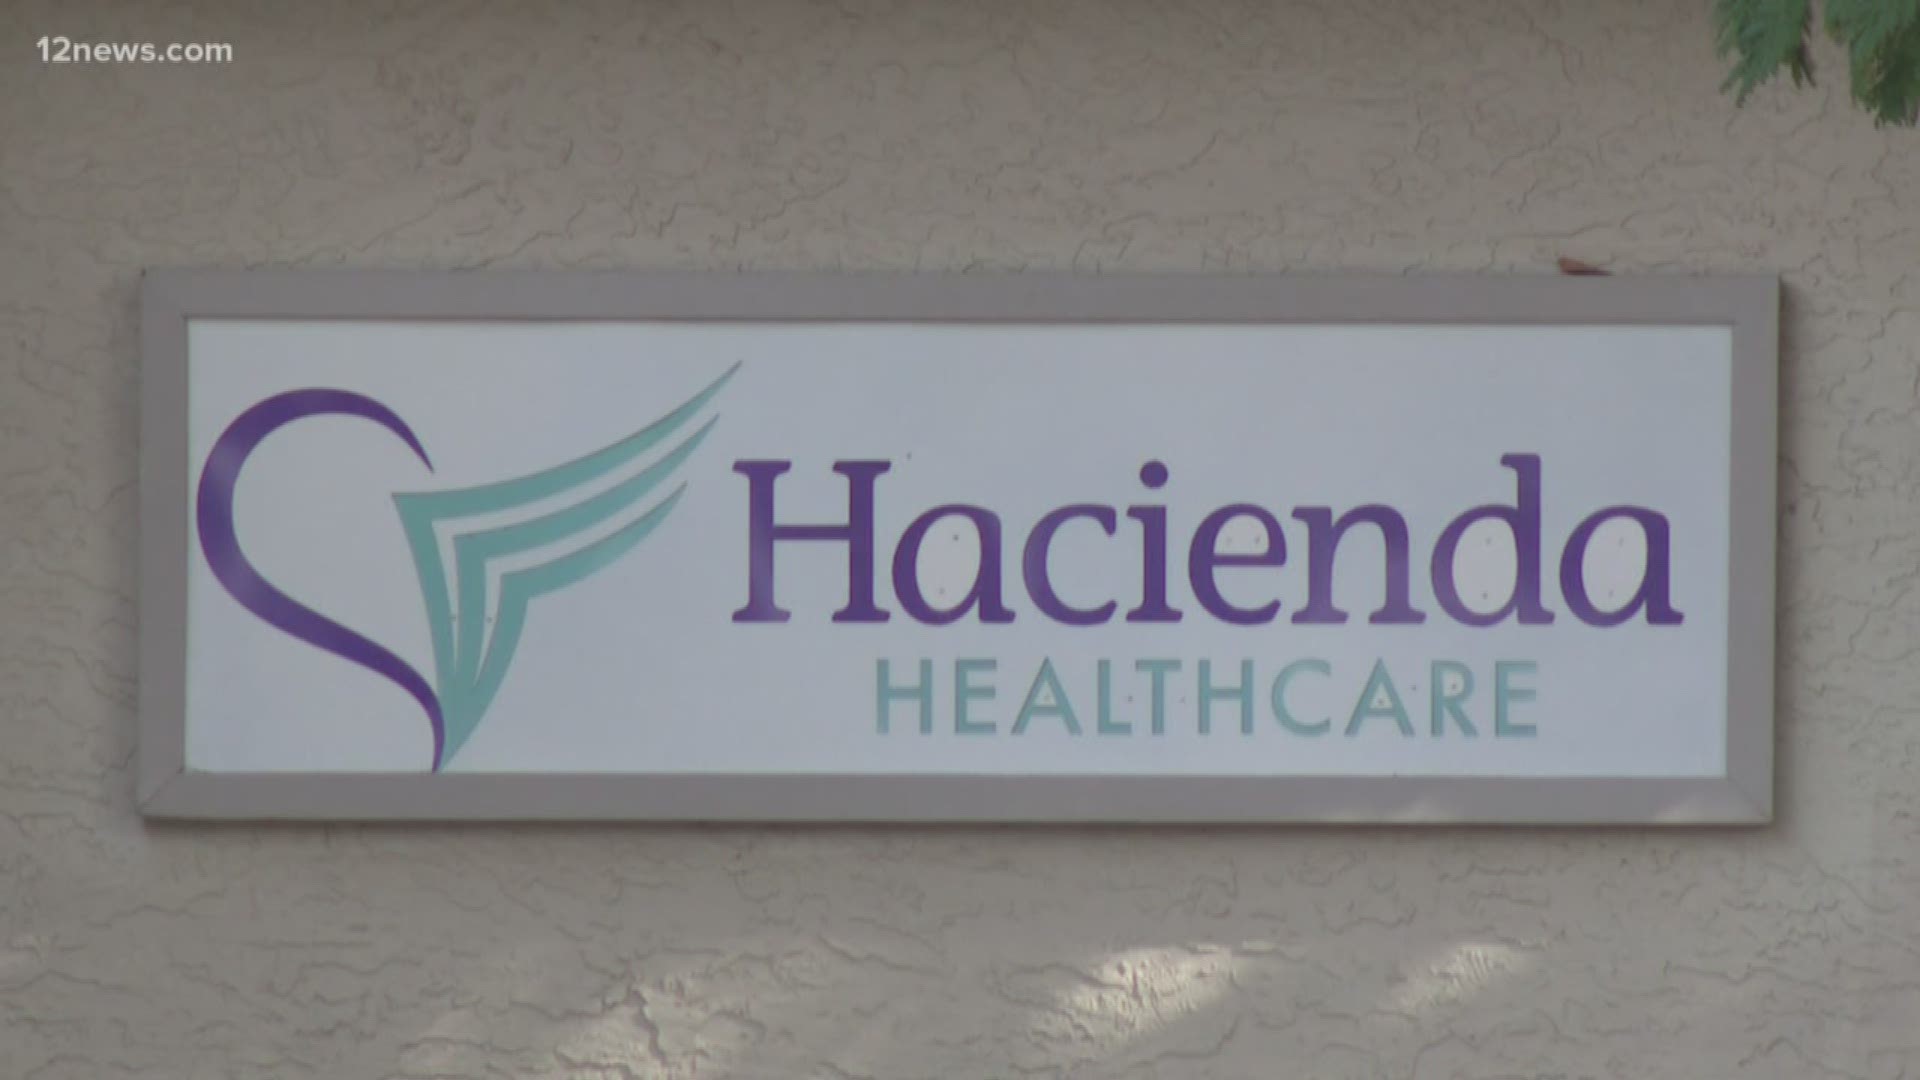 Dr. Kevin Berger was a Hacienda Healthcare board member for seven years. He tells 12 News that he quit out of frustration and fear about what might happen next. Hacienda Healthcare is under investigation after an incapacitated patient gave birth unexpectedly at the facility at the end of December.